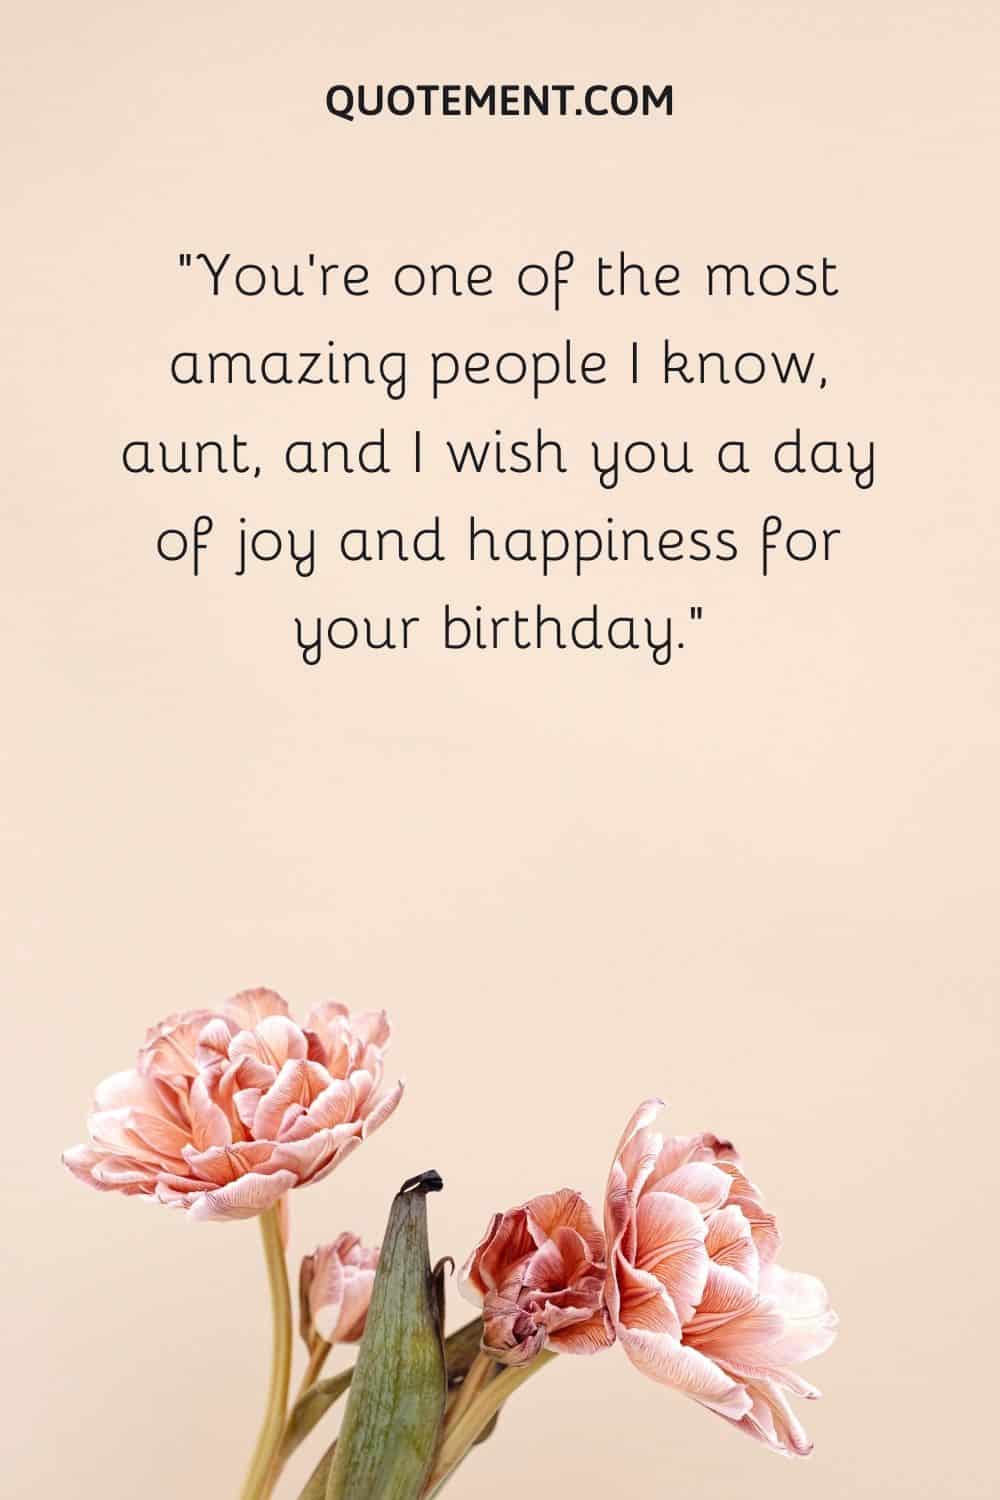 You’re one of the most amazing people I know, aunt, and I wish you a day of joy and happiness for your birthday